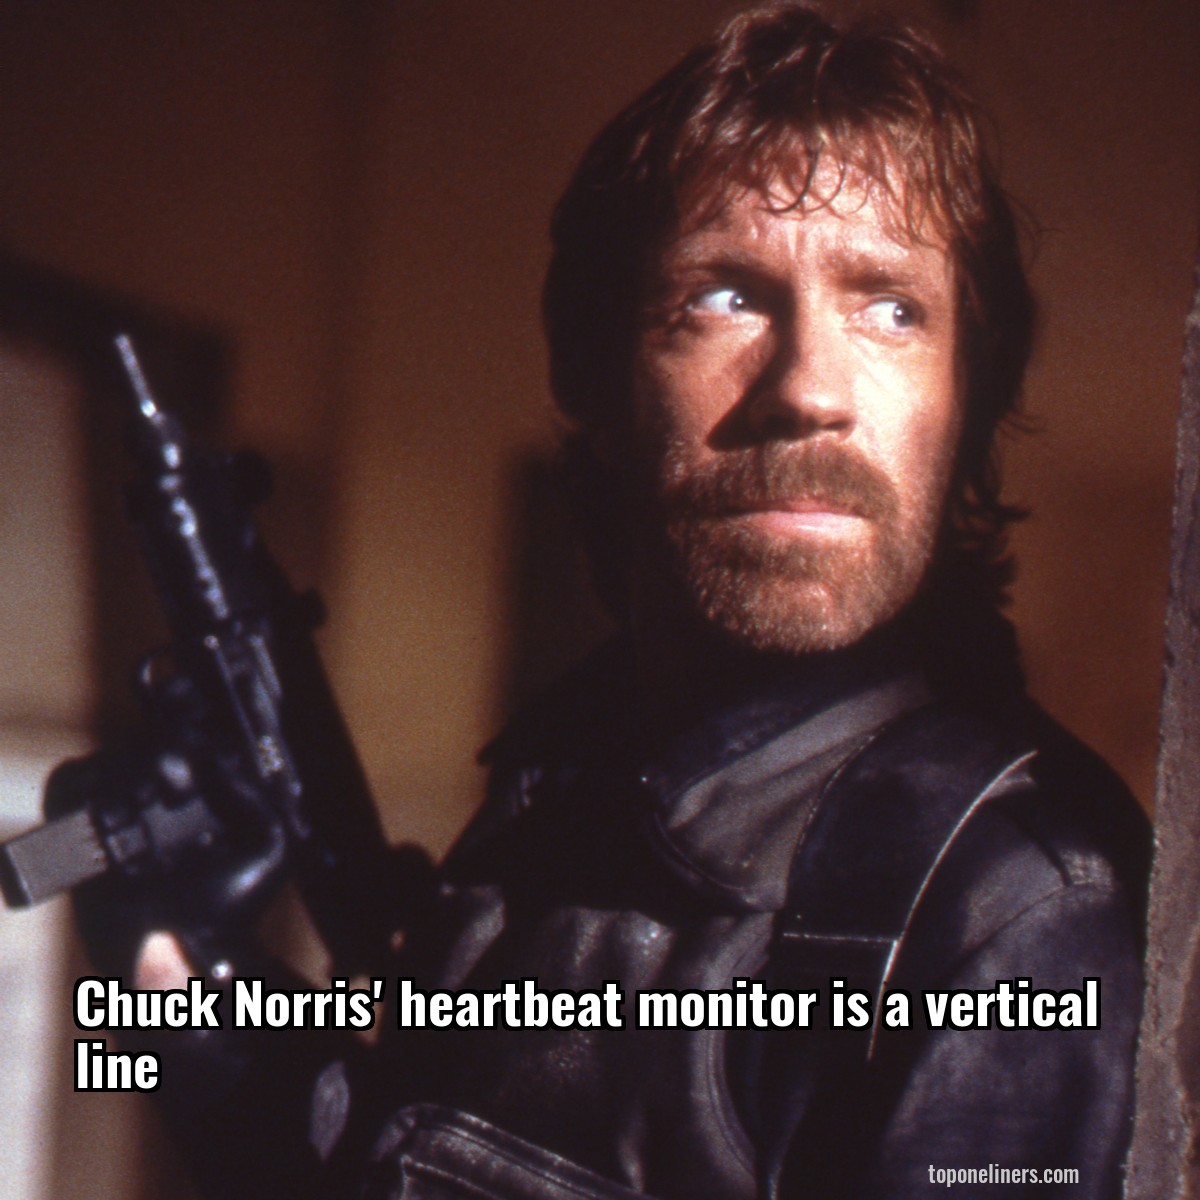 Chuck Norris' heartbeat monitor is a vertical line